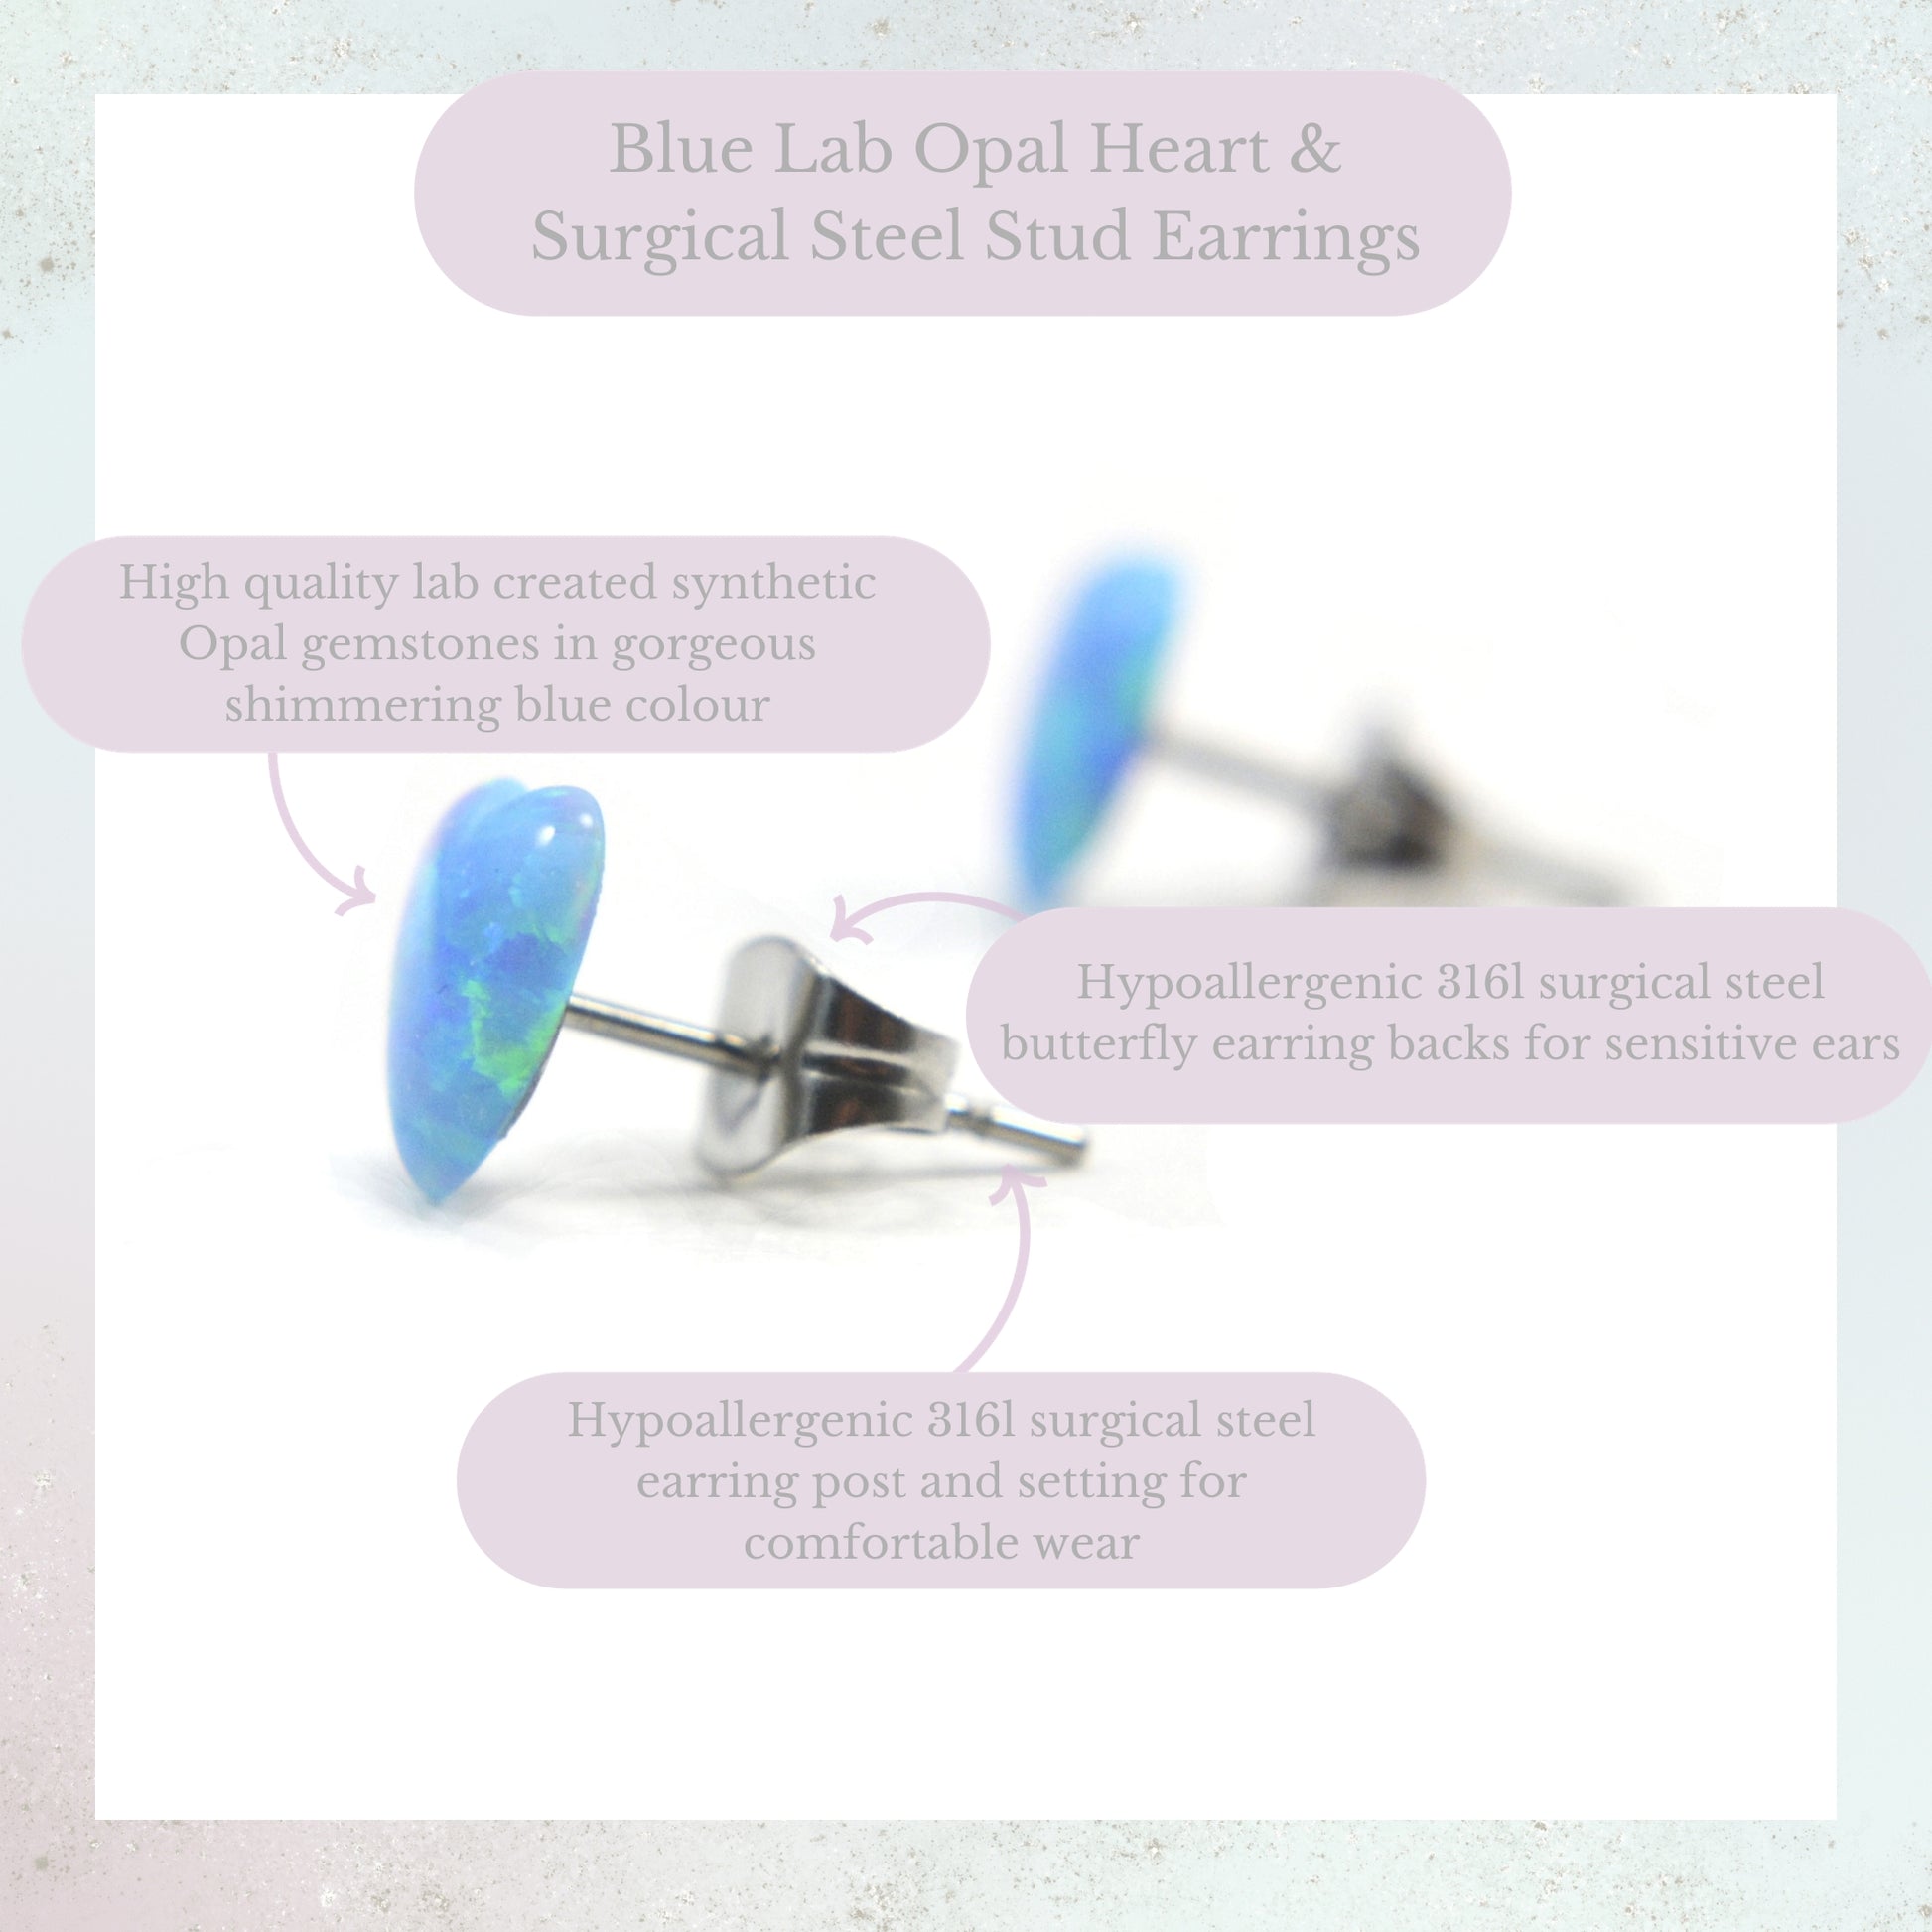 Blue Lab Created Opal Heart & Surgical Steel Stud Earrings Product Information Graphic